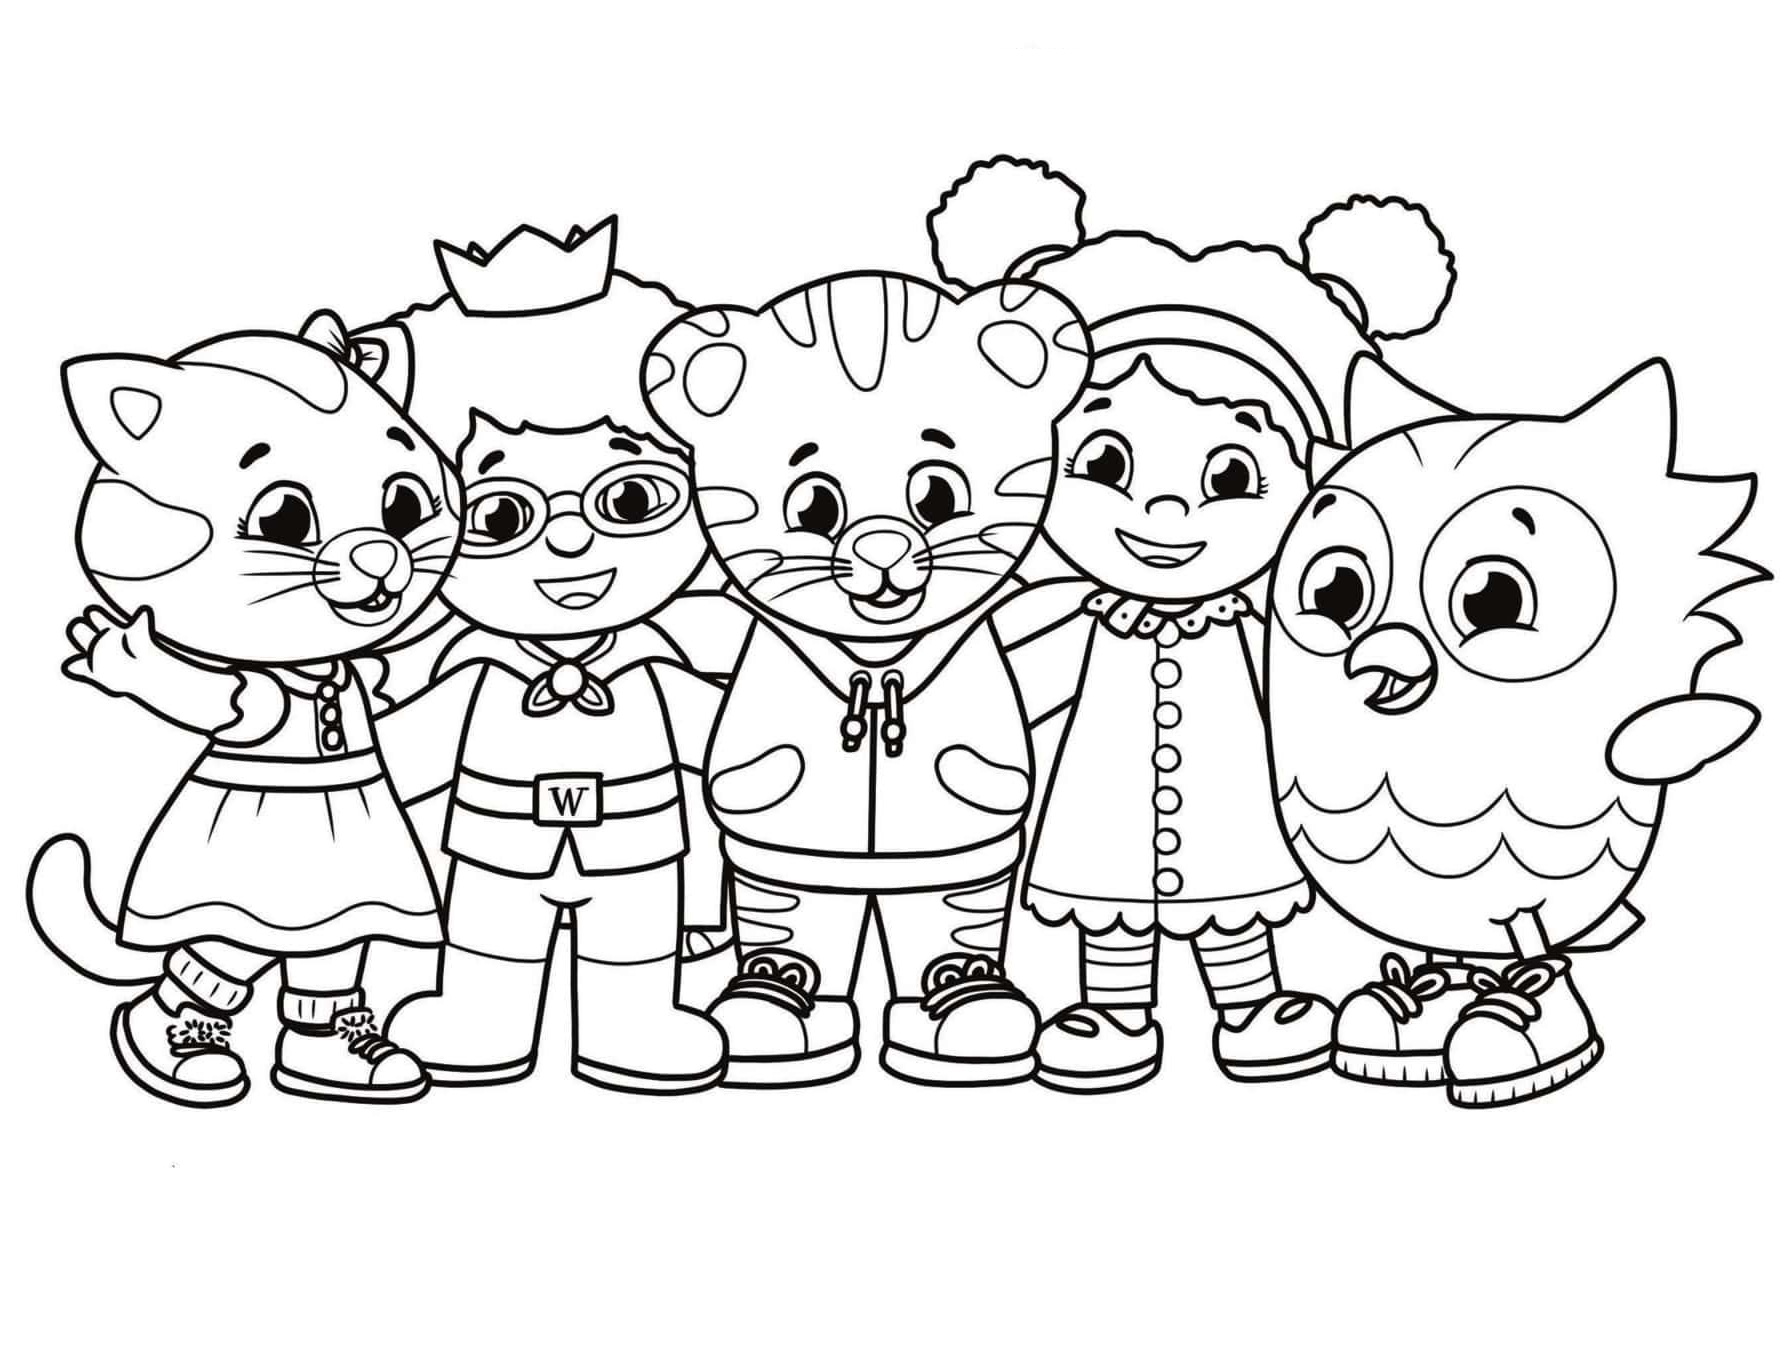 Be My Neighbor Daniel Tiger Coloring Page   Free Printable ...